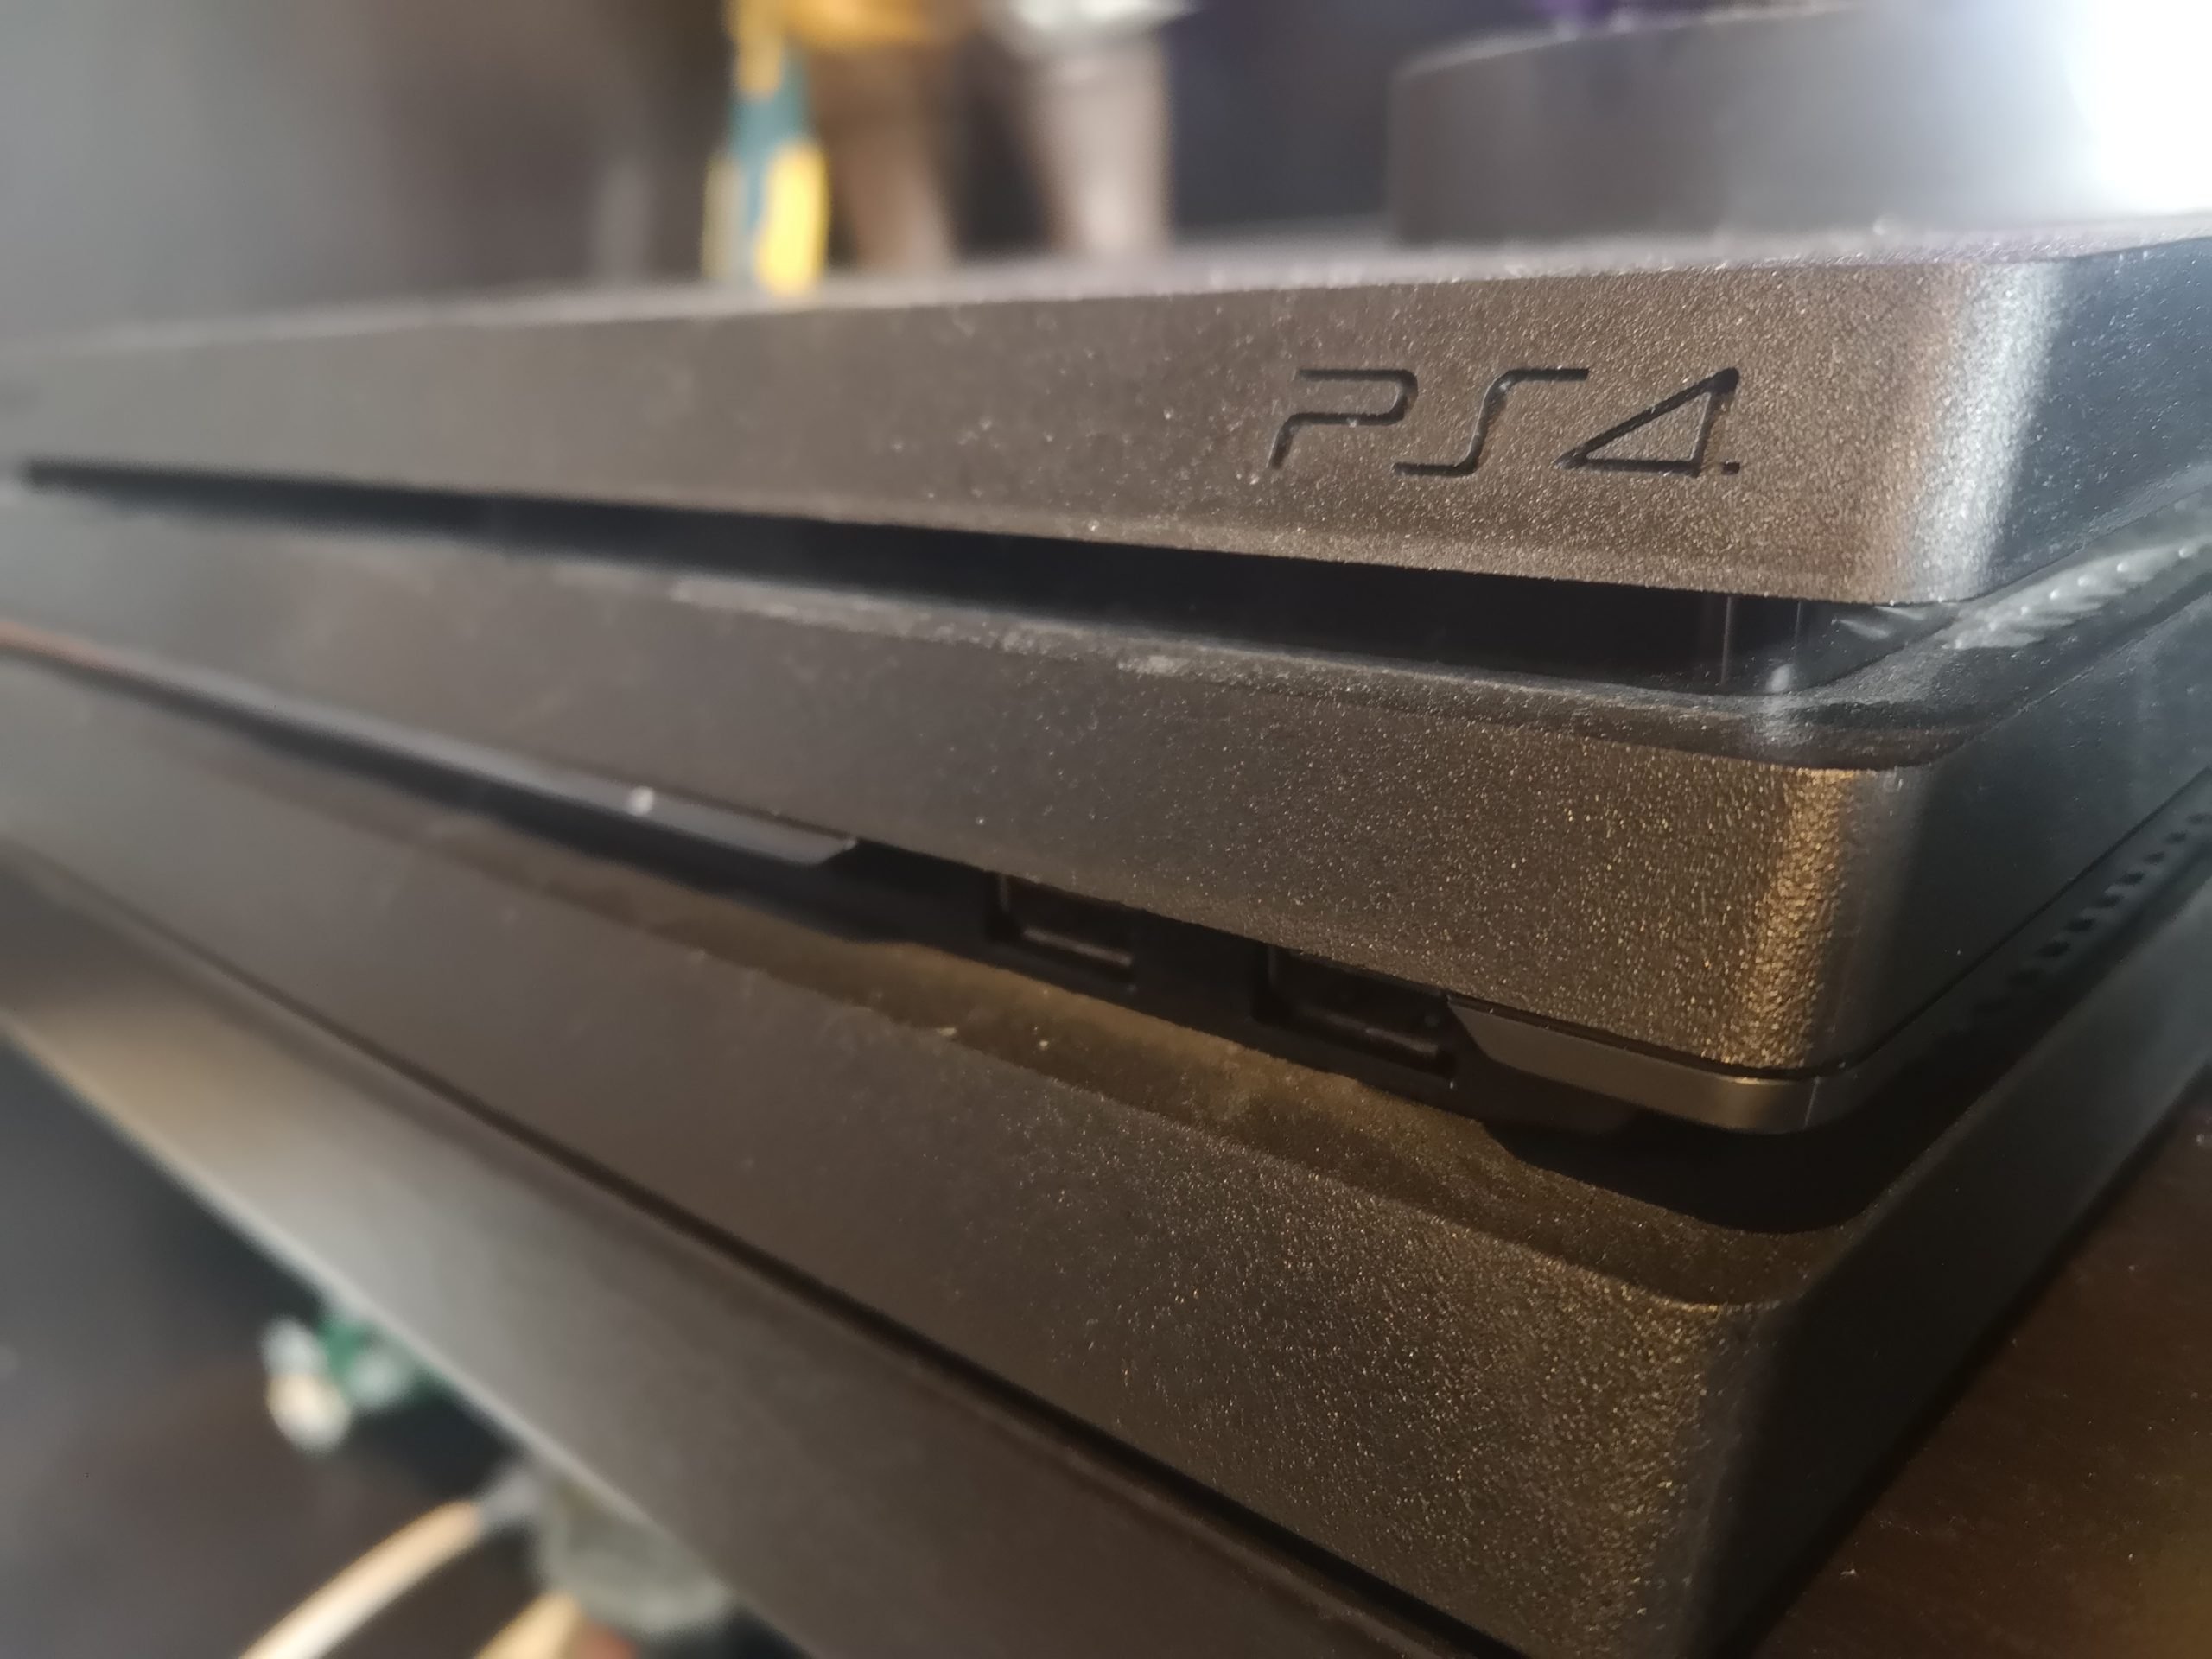 [Solved] [Fixed] PS4 Beeps Once And Turns Off